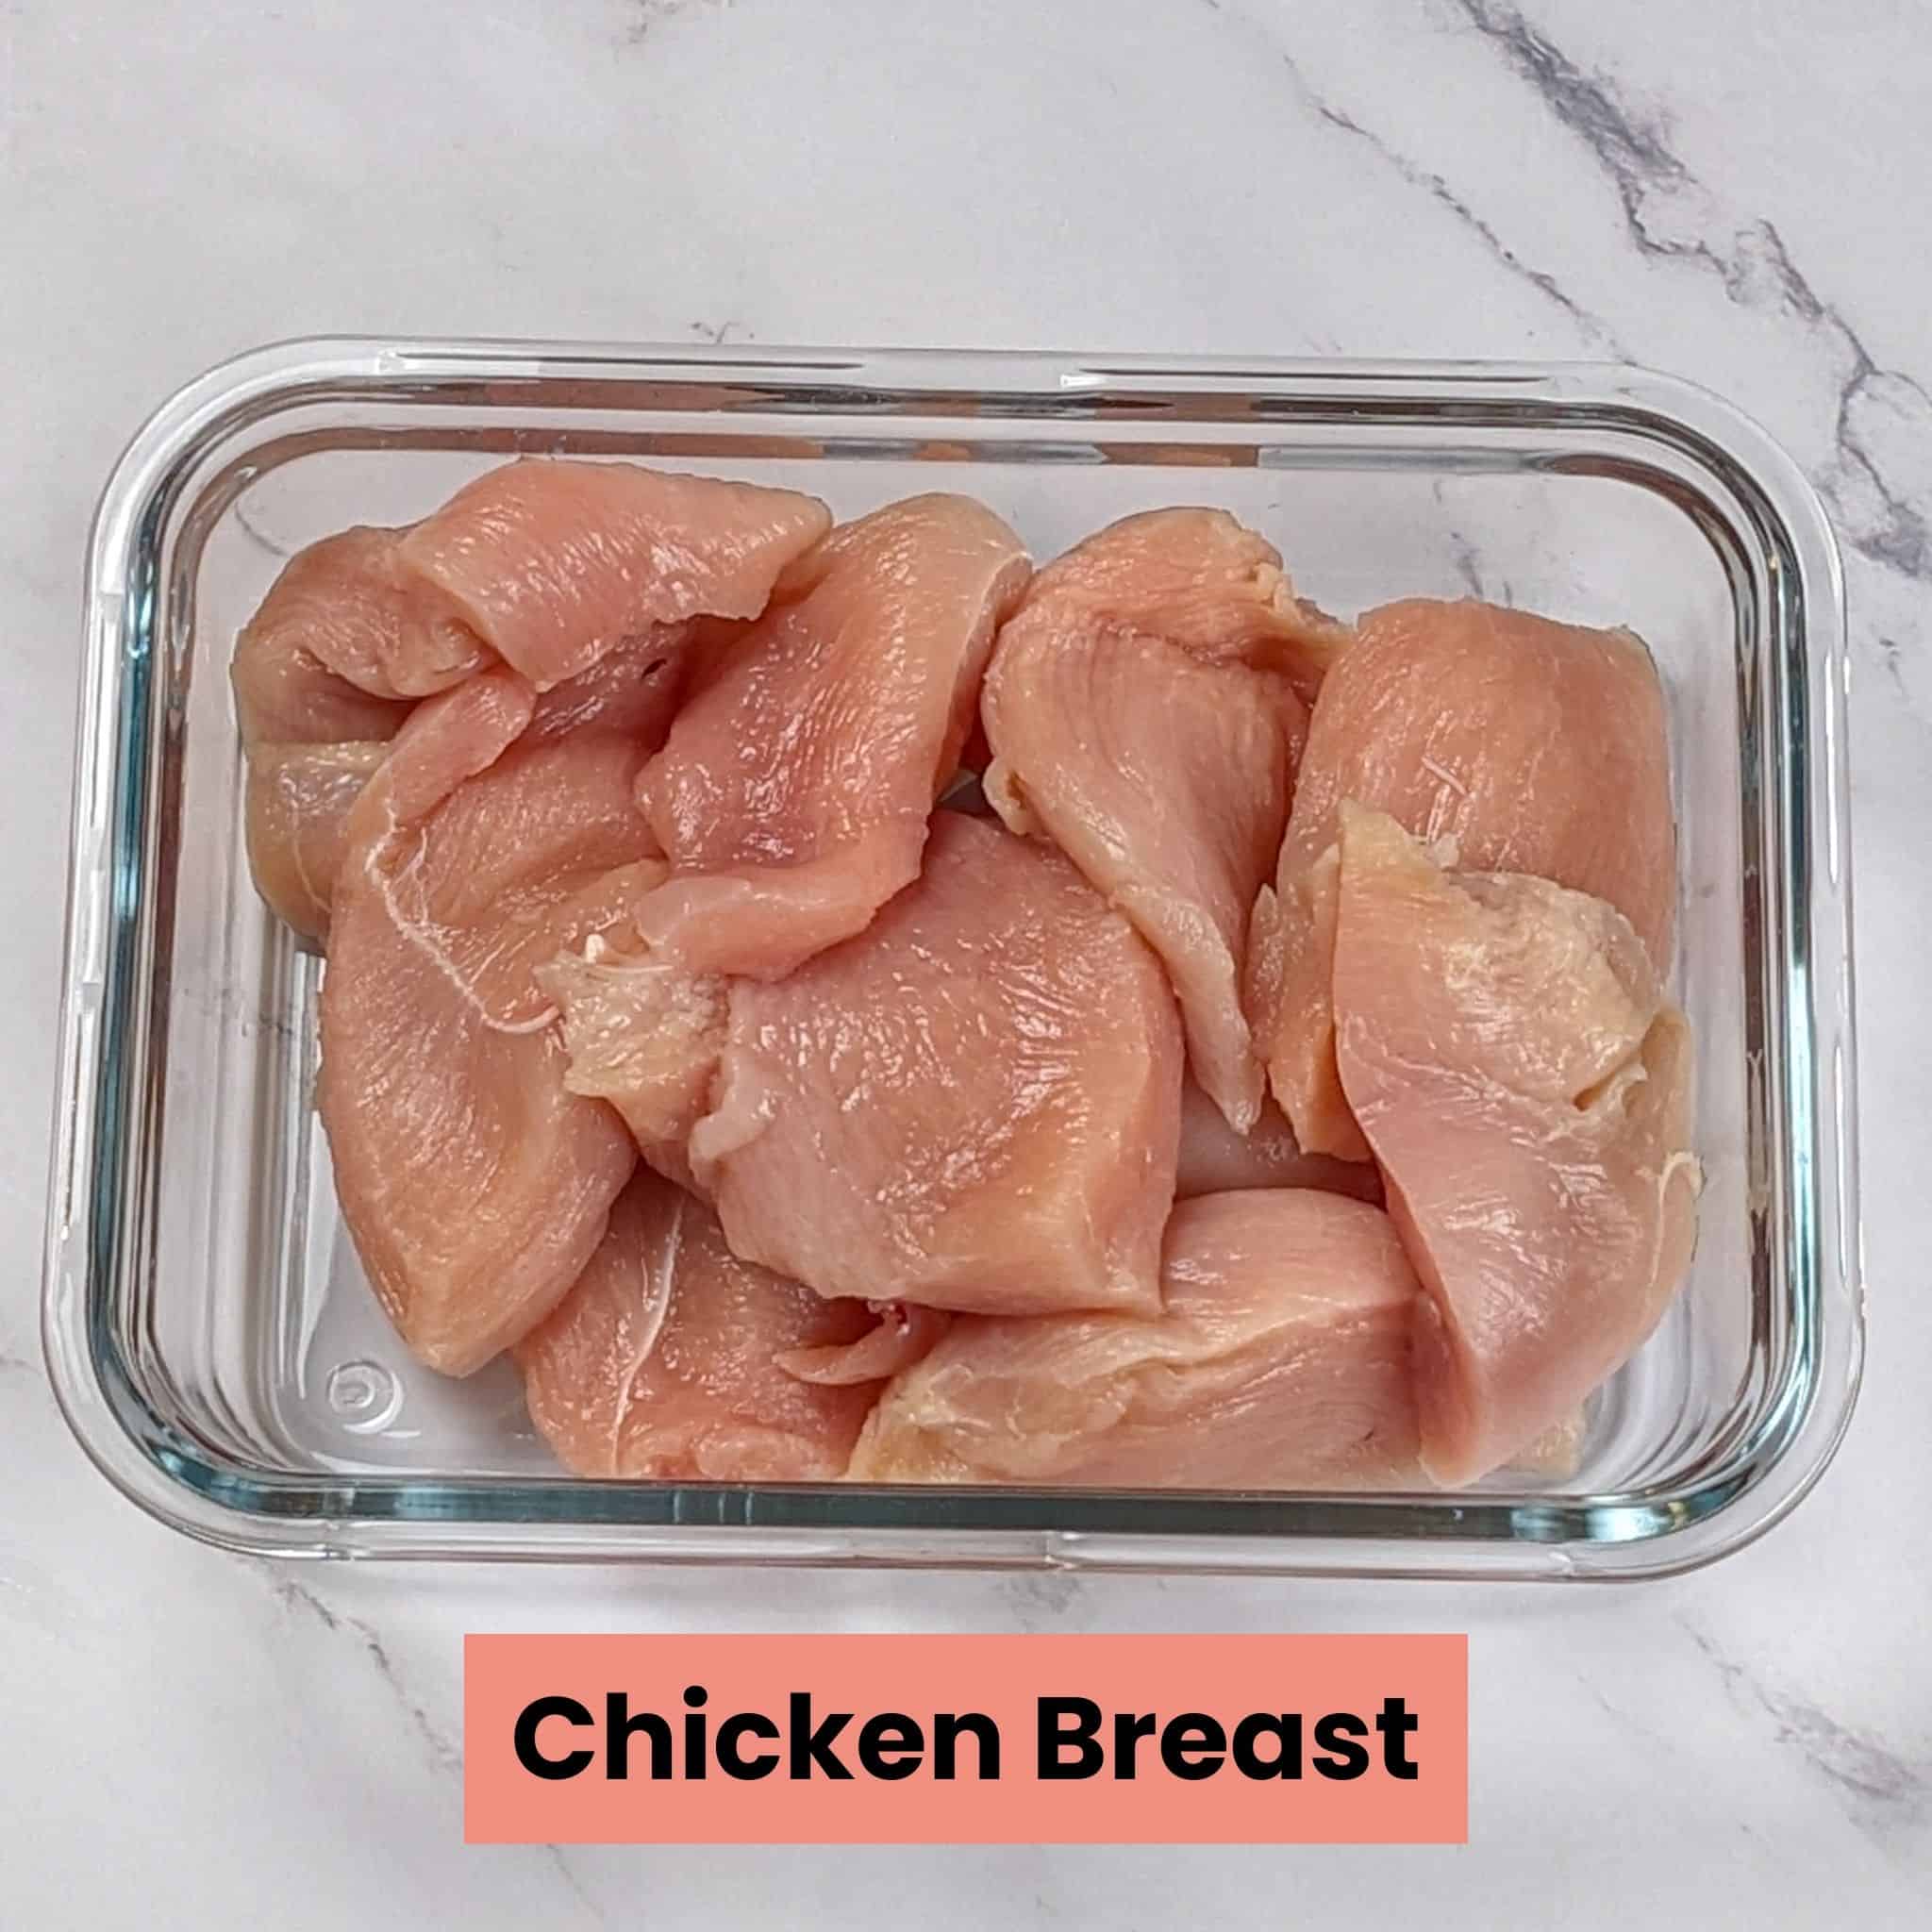 sliced boneless skinless chicken breast in a square glass container.